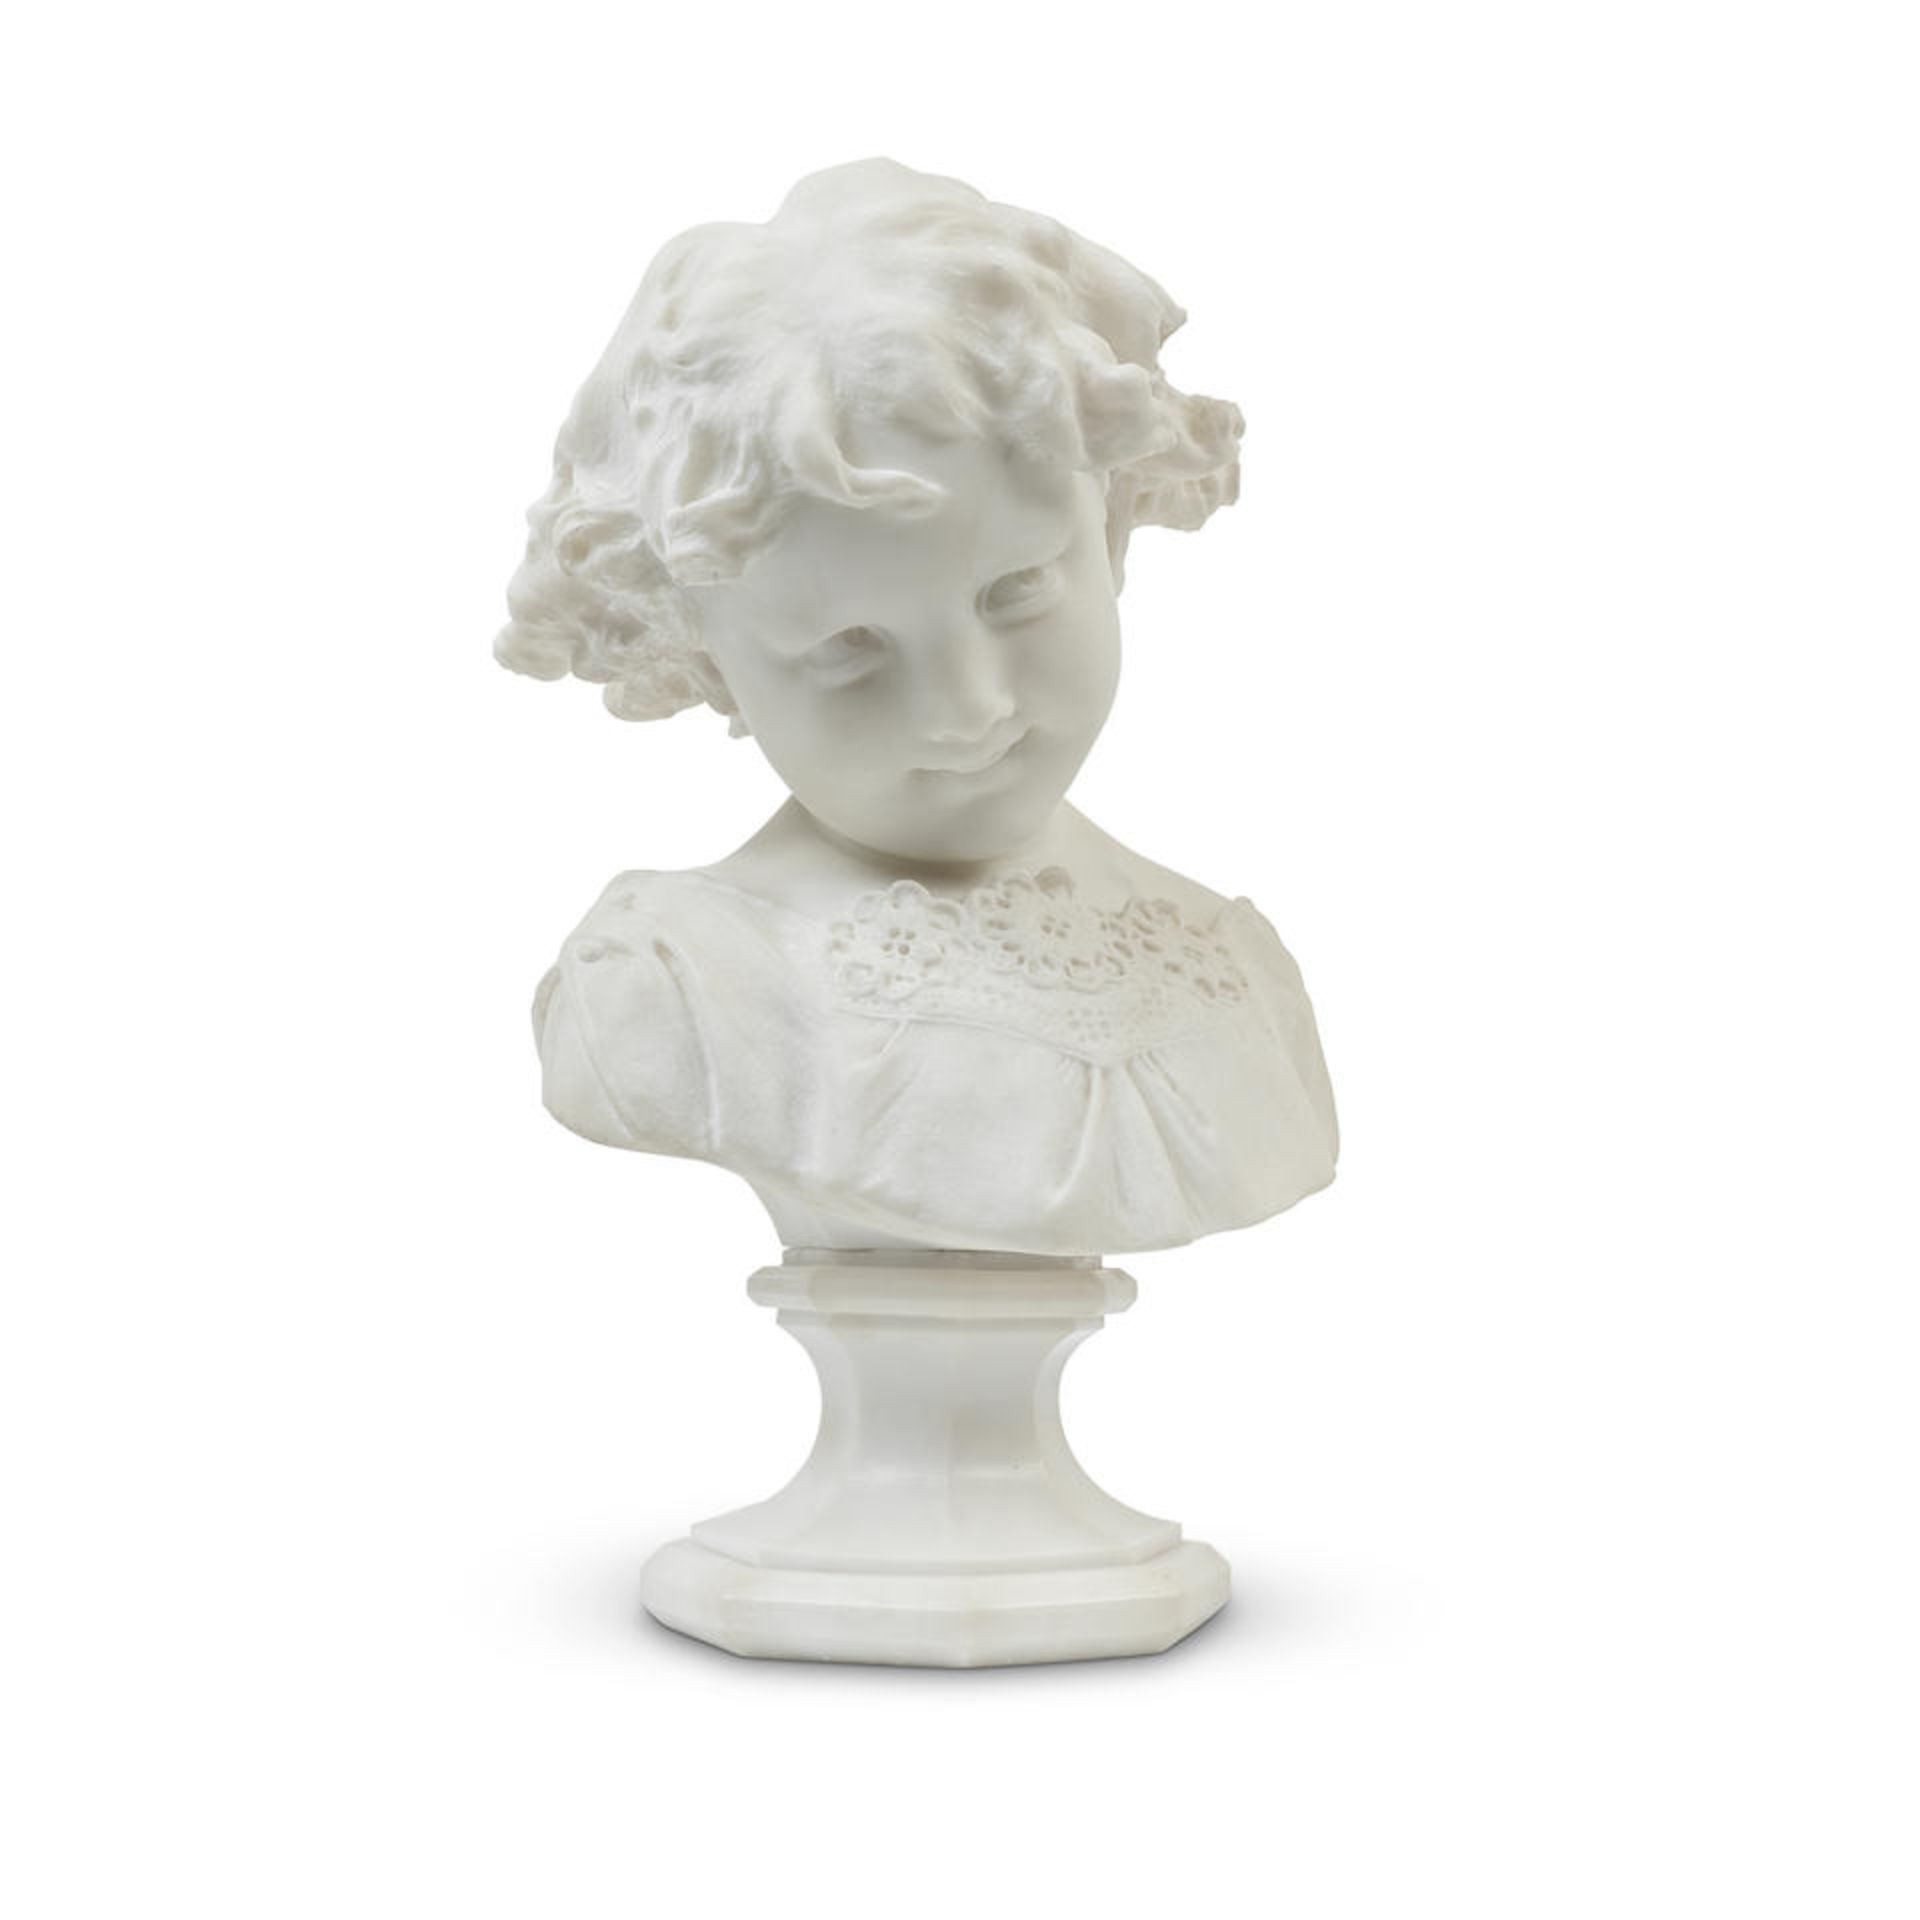 A late 19th century Italian carved marble bust of a pensive young girl